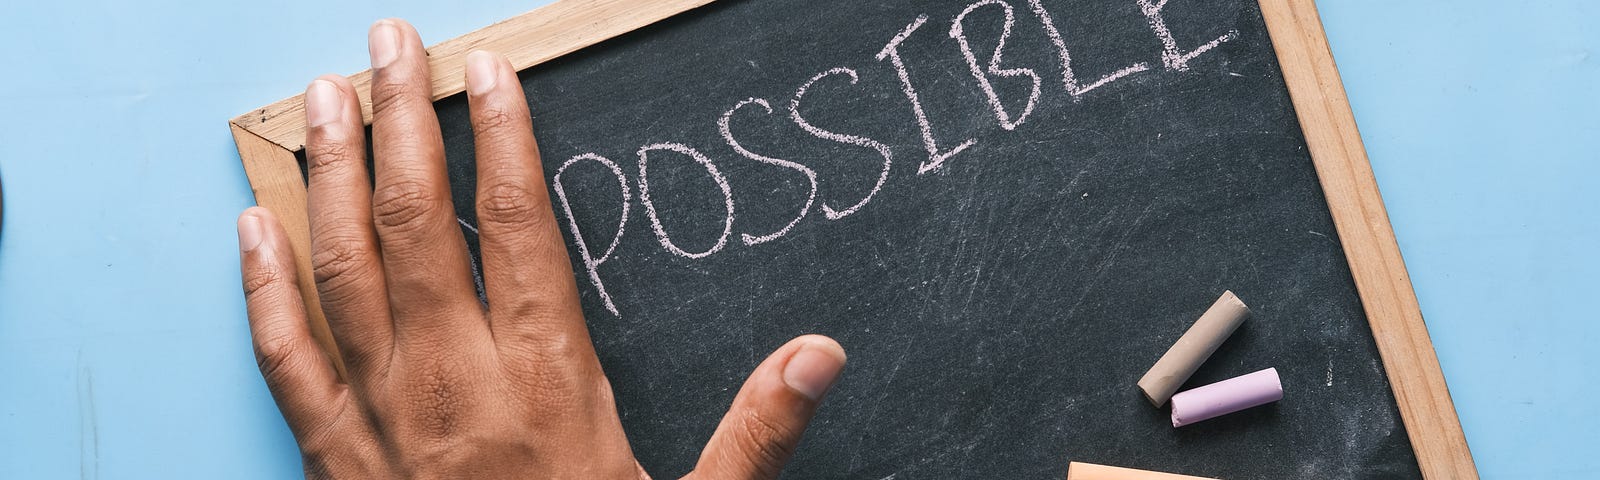 Small chalkboard with the word “Possible” written and a hand covering a word (probably “not”) next to it